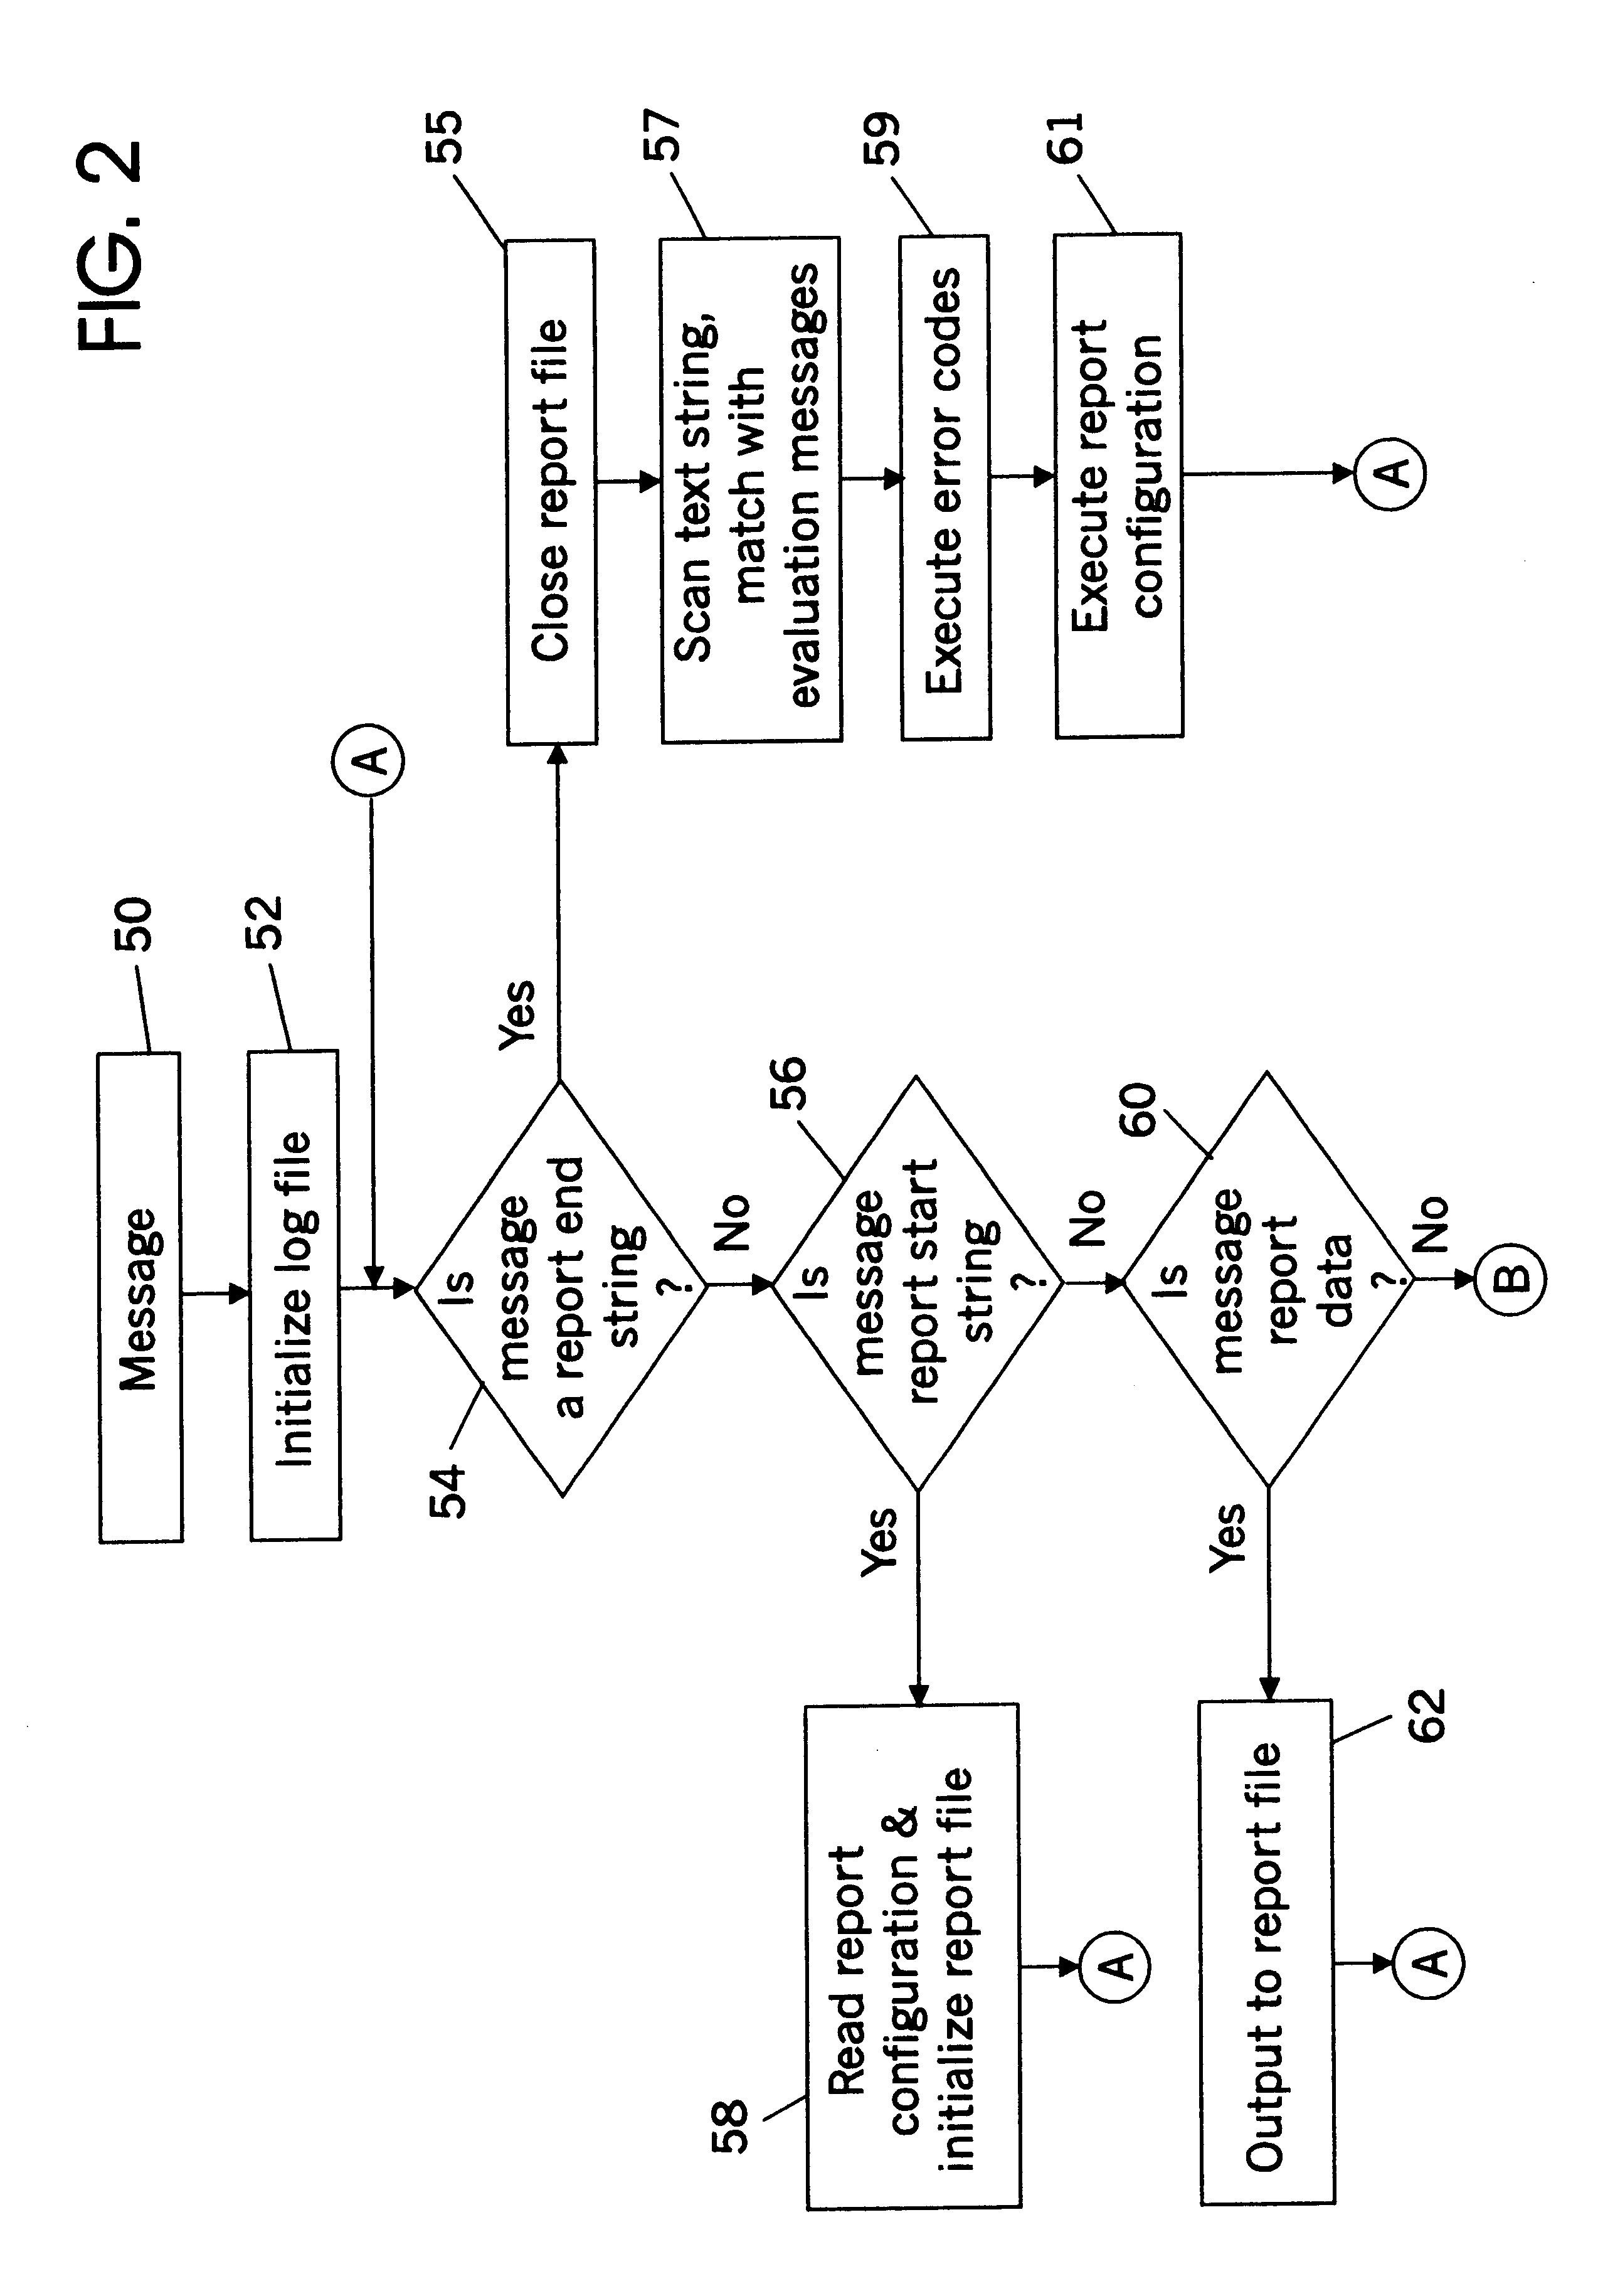 Method and apparatus for site management